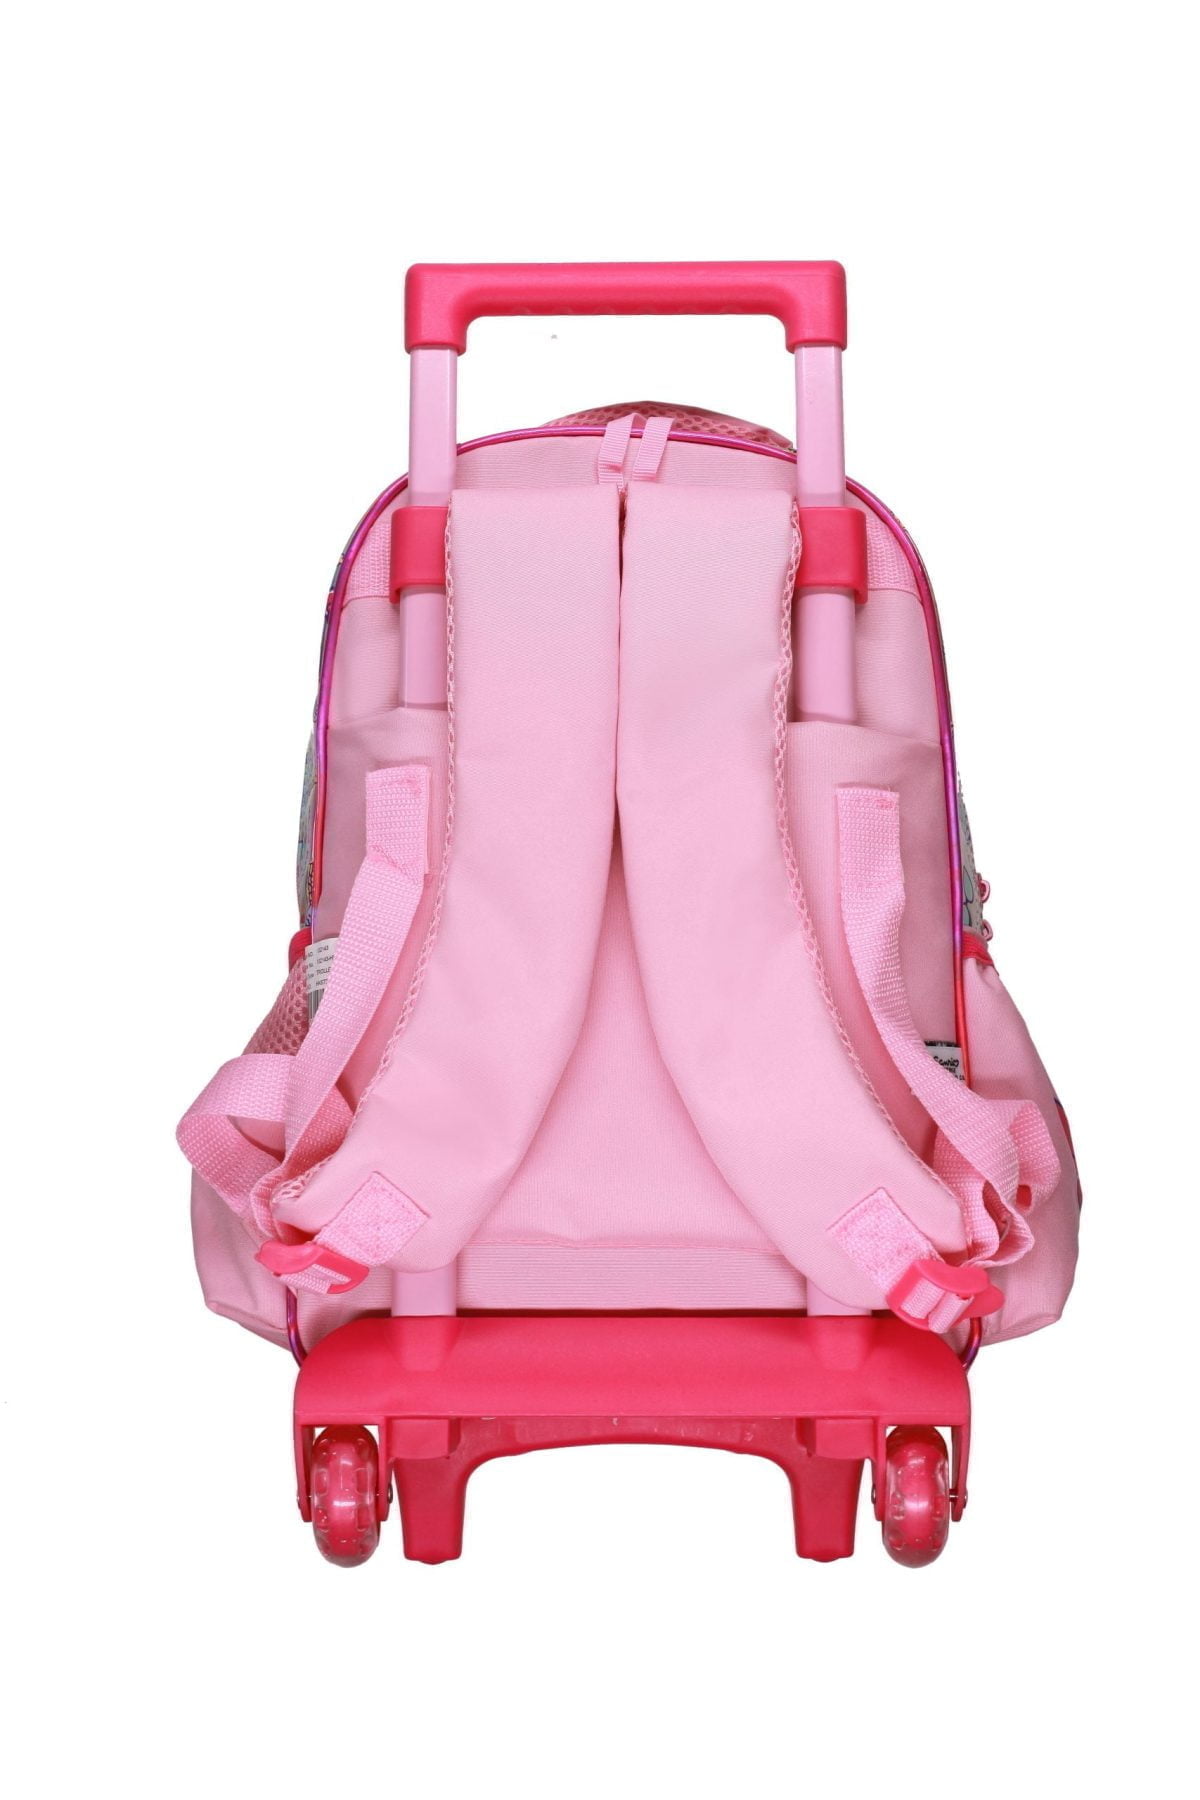 Hk672 3090T 3 Scaled Hello Kitty The Trolley Bag Is A Reliable Companion For Your Journey. The Trolley Features Main Zip Compartment To Keep Your Child'S Belonging Or School Items. The Trolley Has Comfortable Handle On The Top. The Fine Quality Material And Printing Makes It Durable And Stylish Option. It Is Easy To Zip And Unzip With Smooth Zippers And Pullers. The Wheels On The Bottom Make It Easy To Drag. Wipe With A Clean And Dry Cloth. Hello Kitty Trolley Bag Hello Kitty Trolley Bag 15&Quot; - 2 Main Compartments And 2 Side Pockets (Hk672)